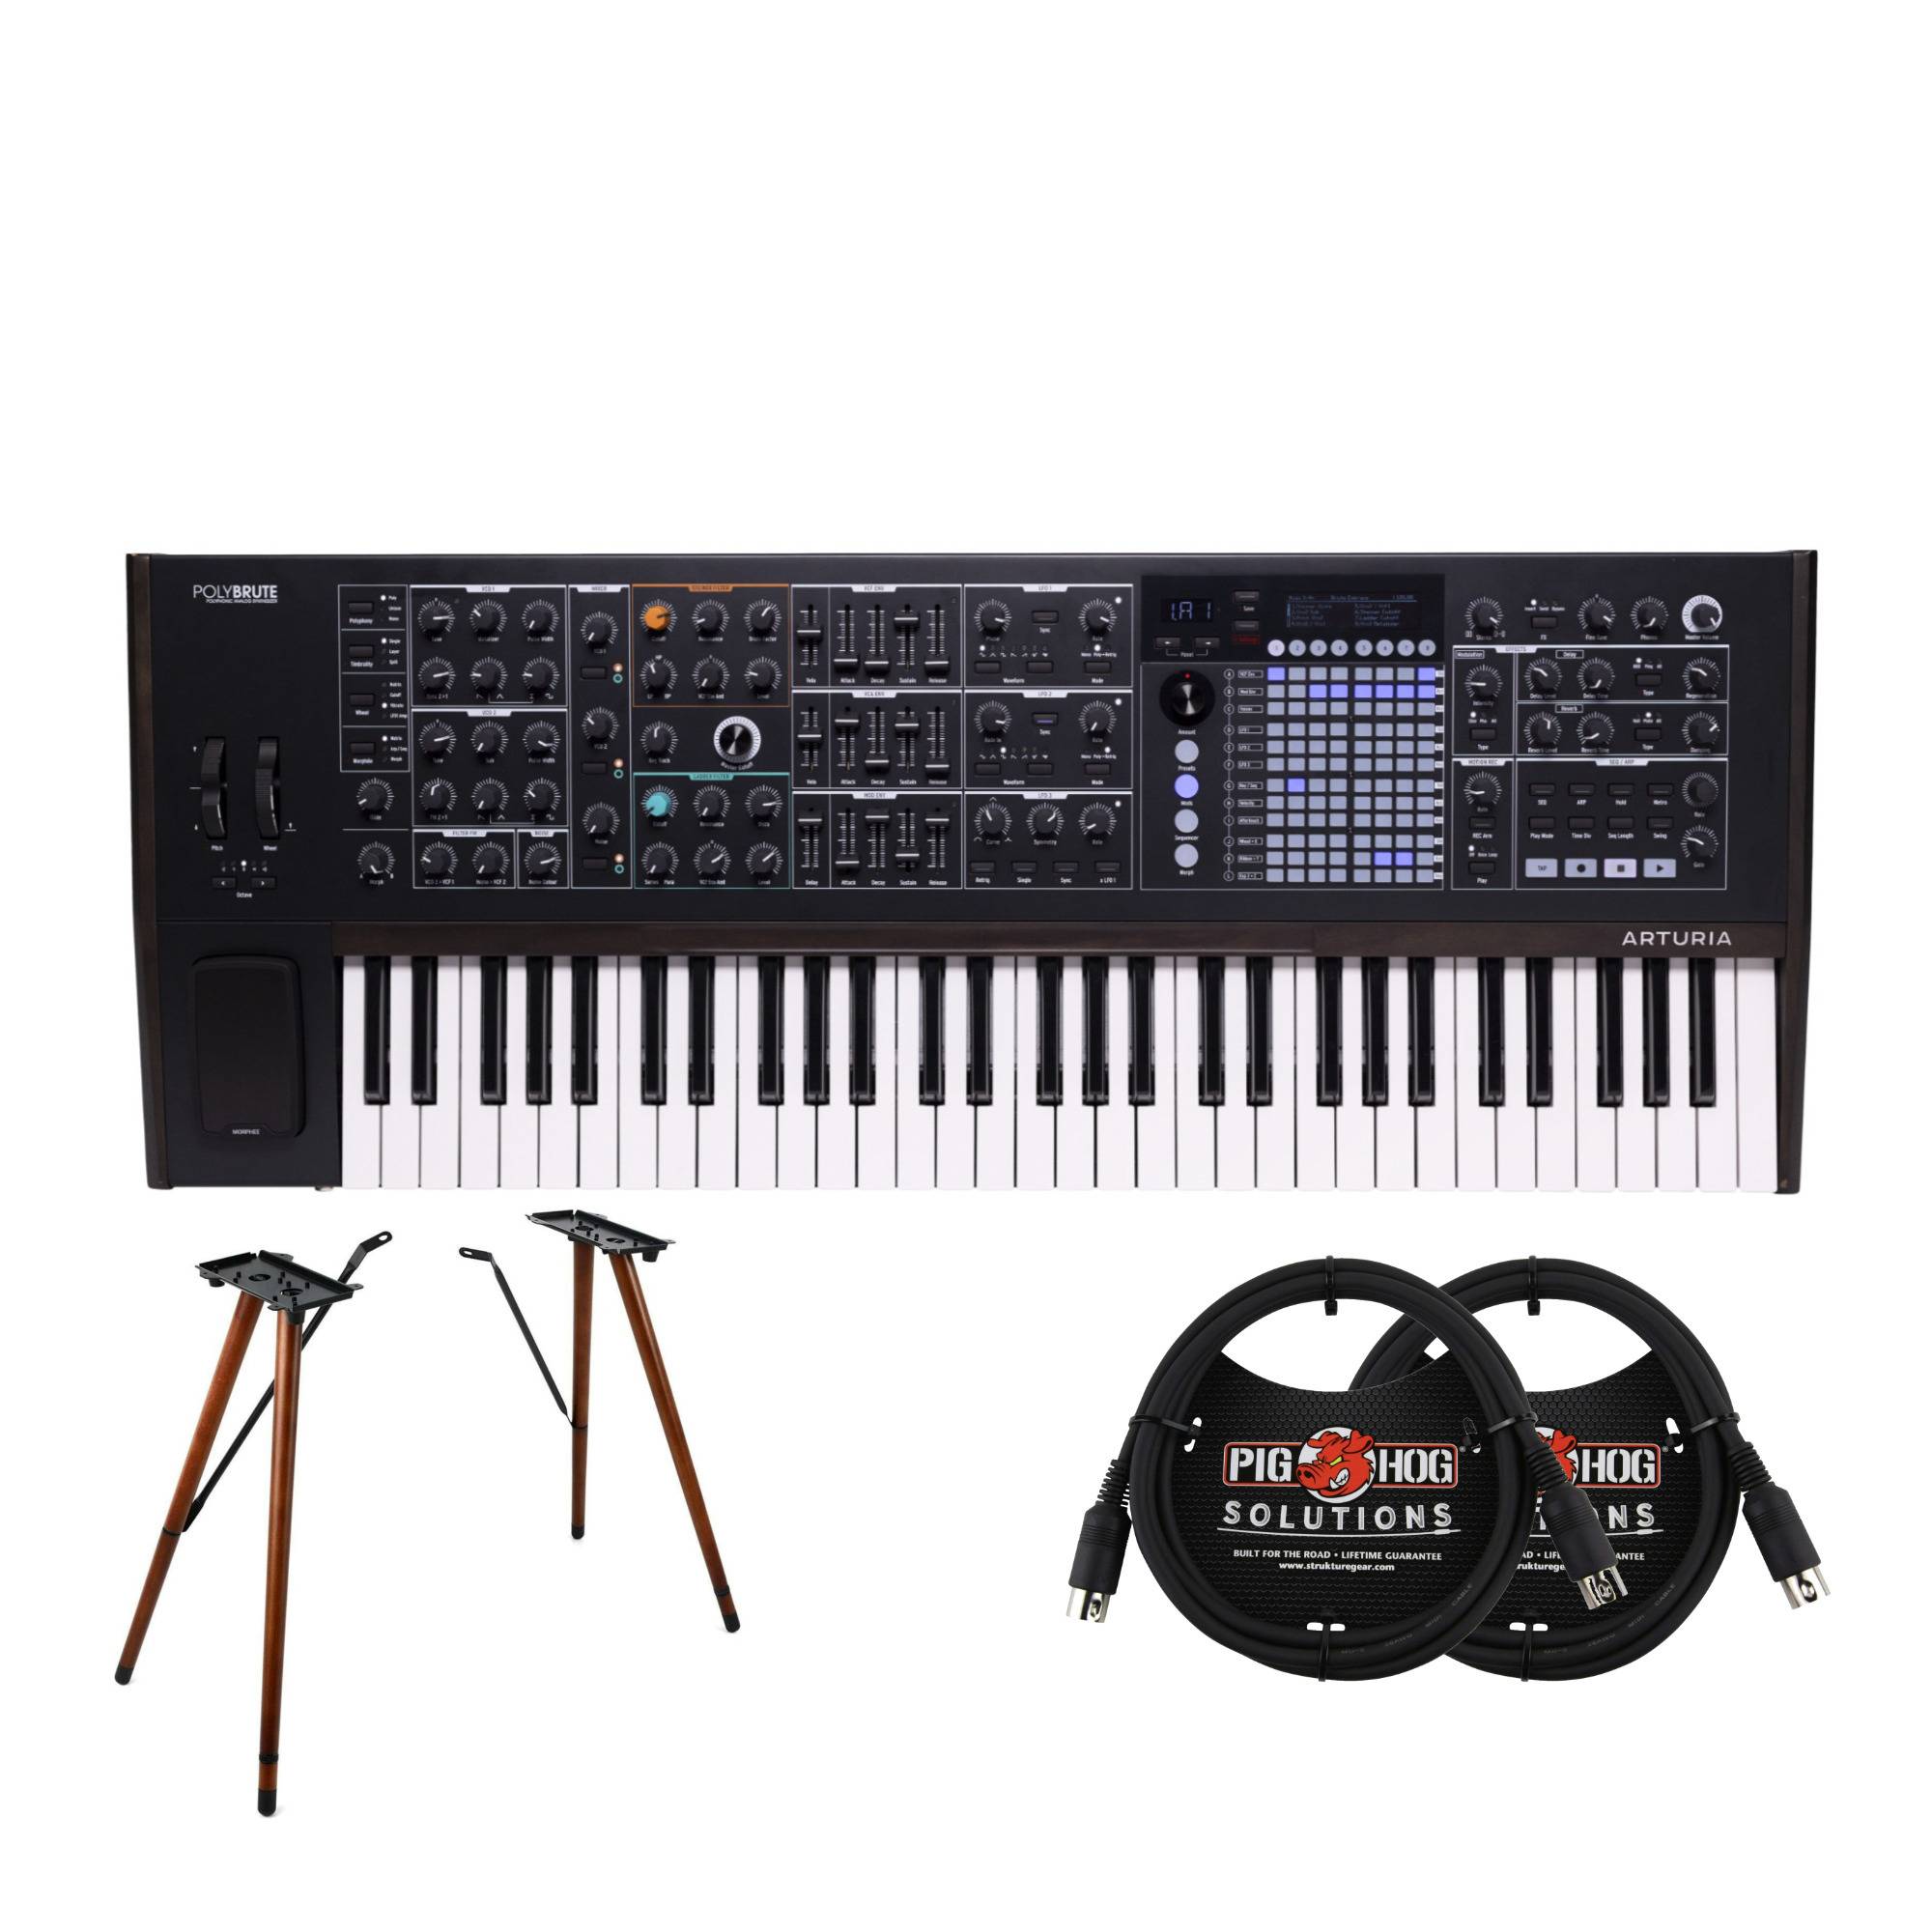 Arturia PolyBrute 6-Voice 61-Note Polyphonic Synthesizer (Noir) with Wooden Legs and MIDI Cables